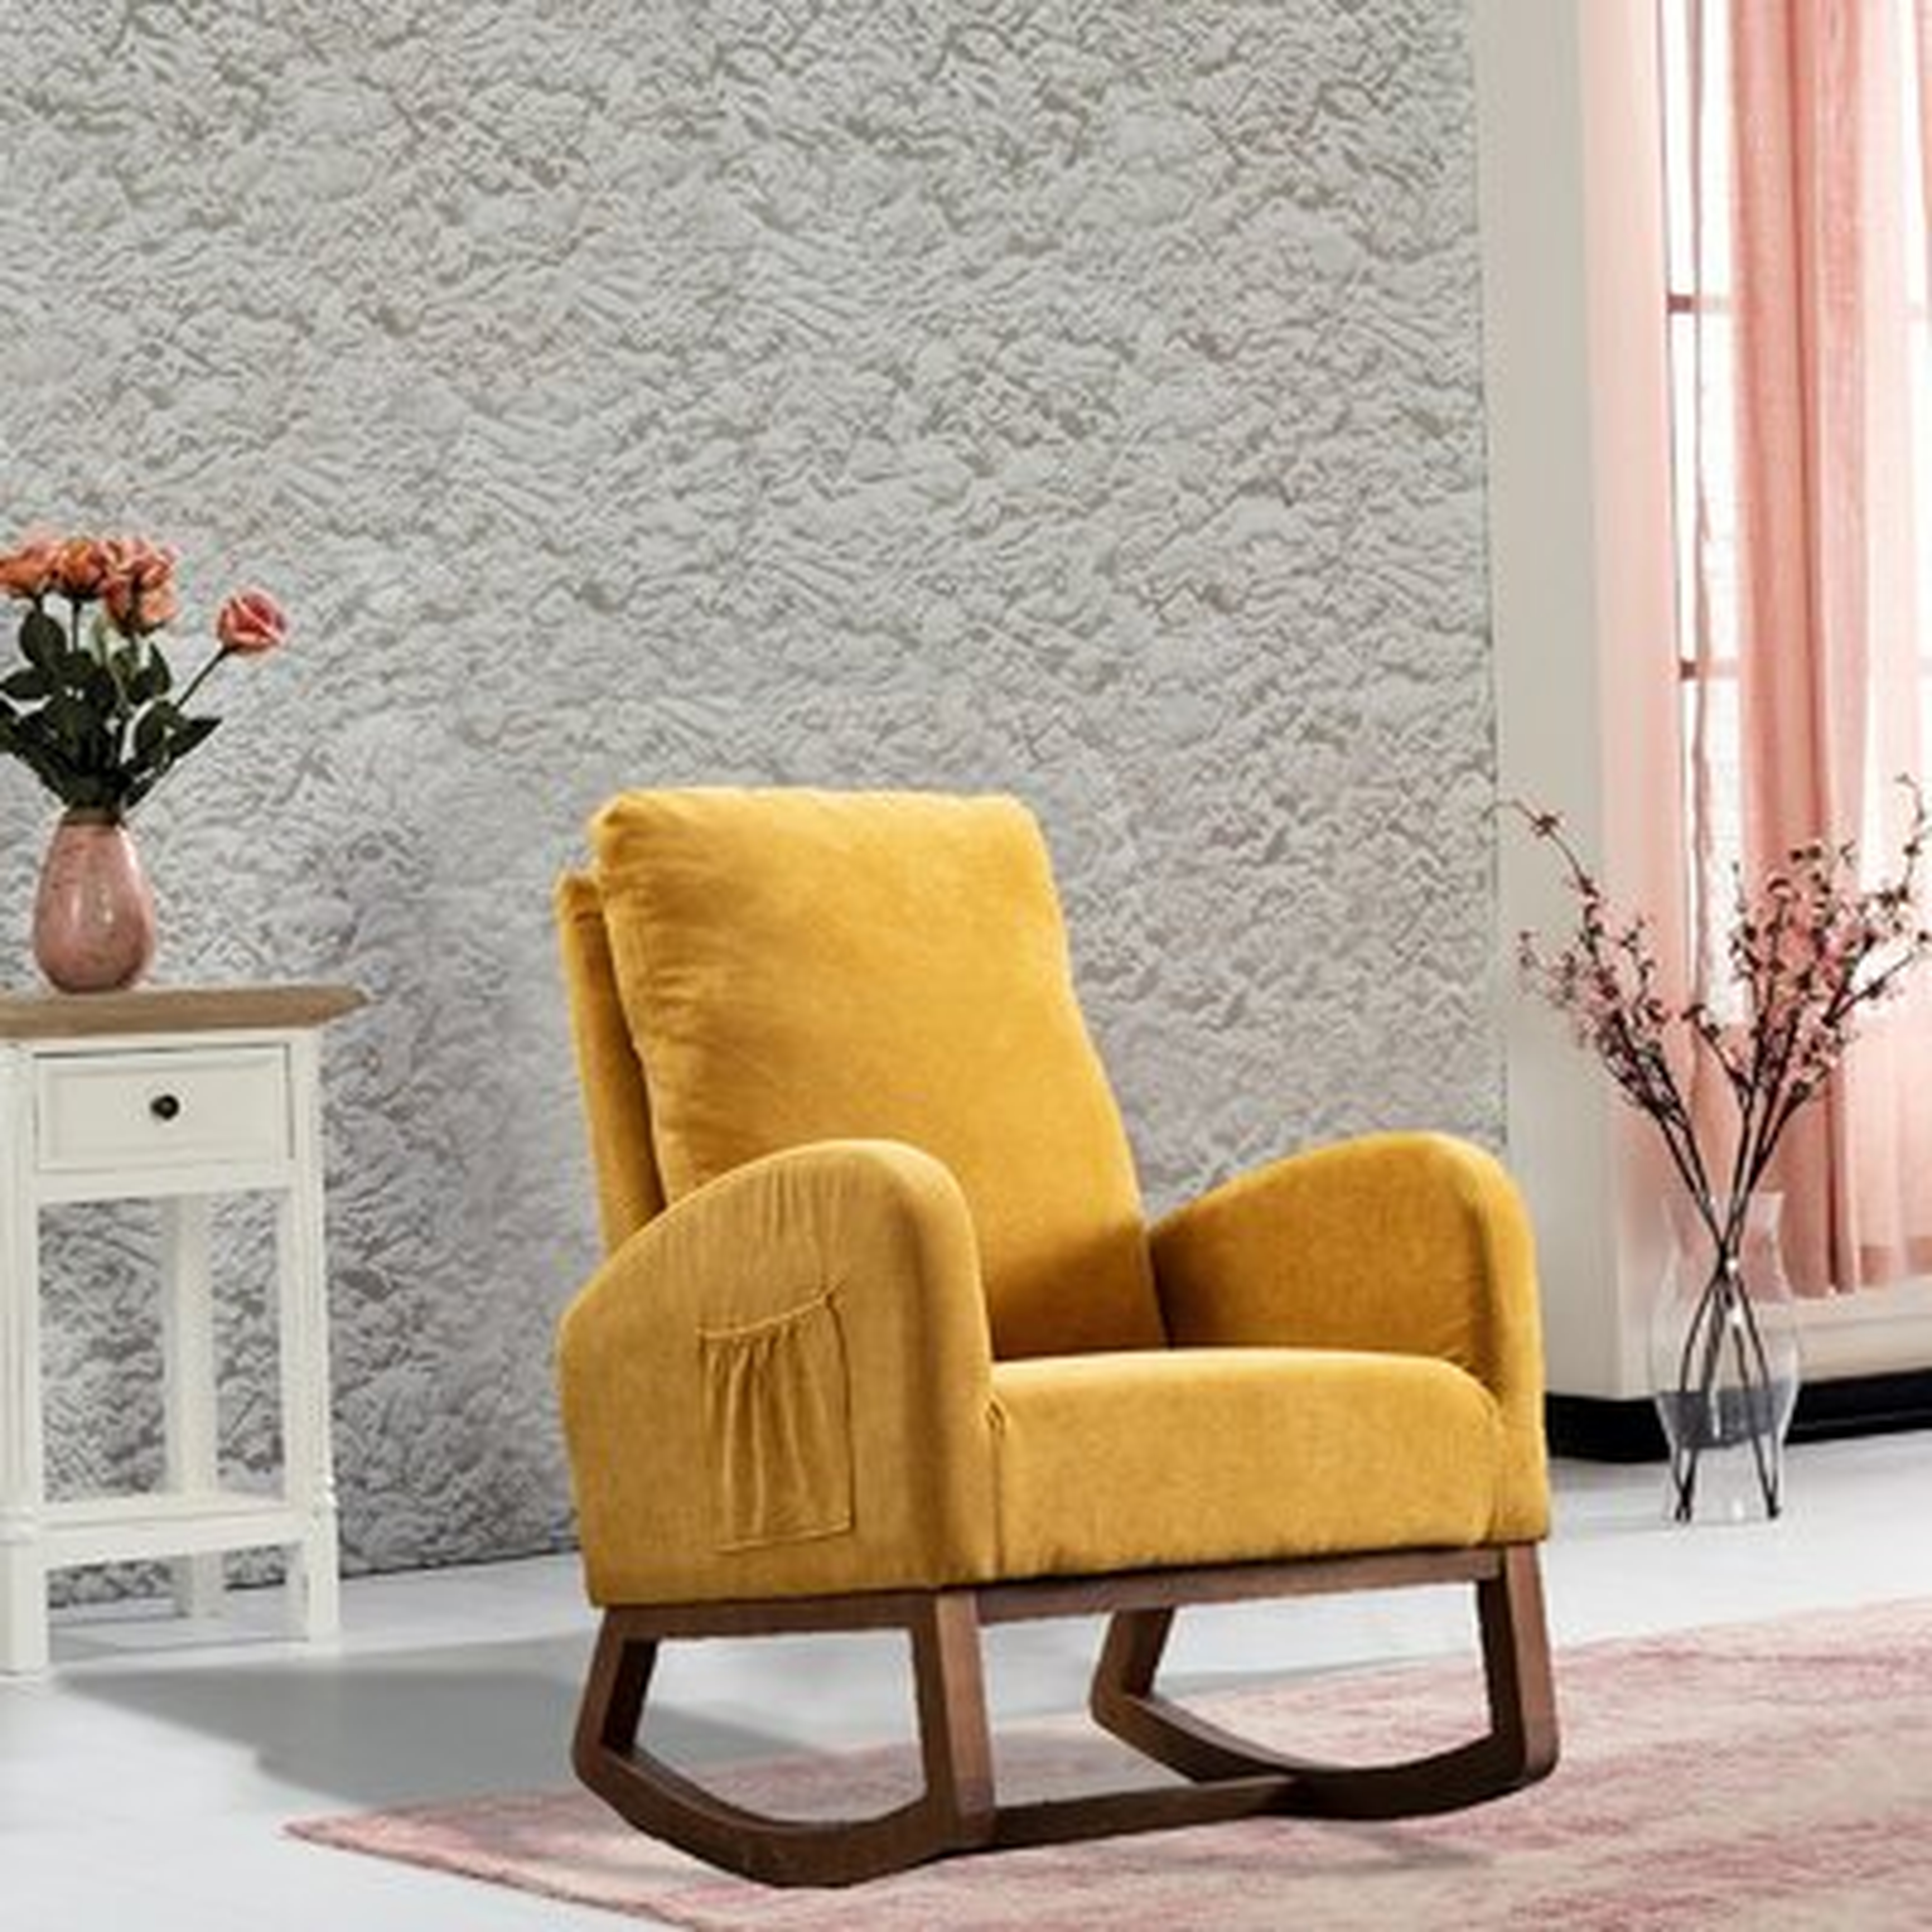 Upholstered Rocking Chair,Fabric Accent Armchair Wooden Padded Seat With Side Pocket - Wayfair